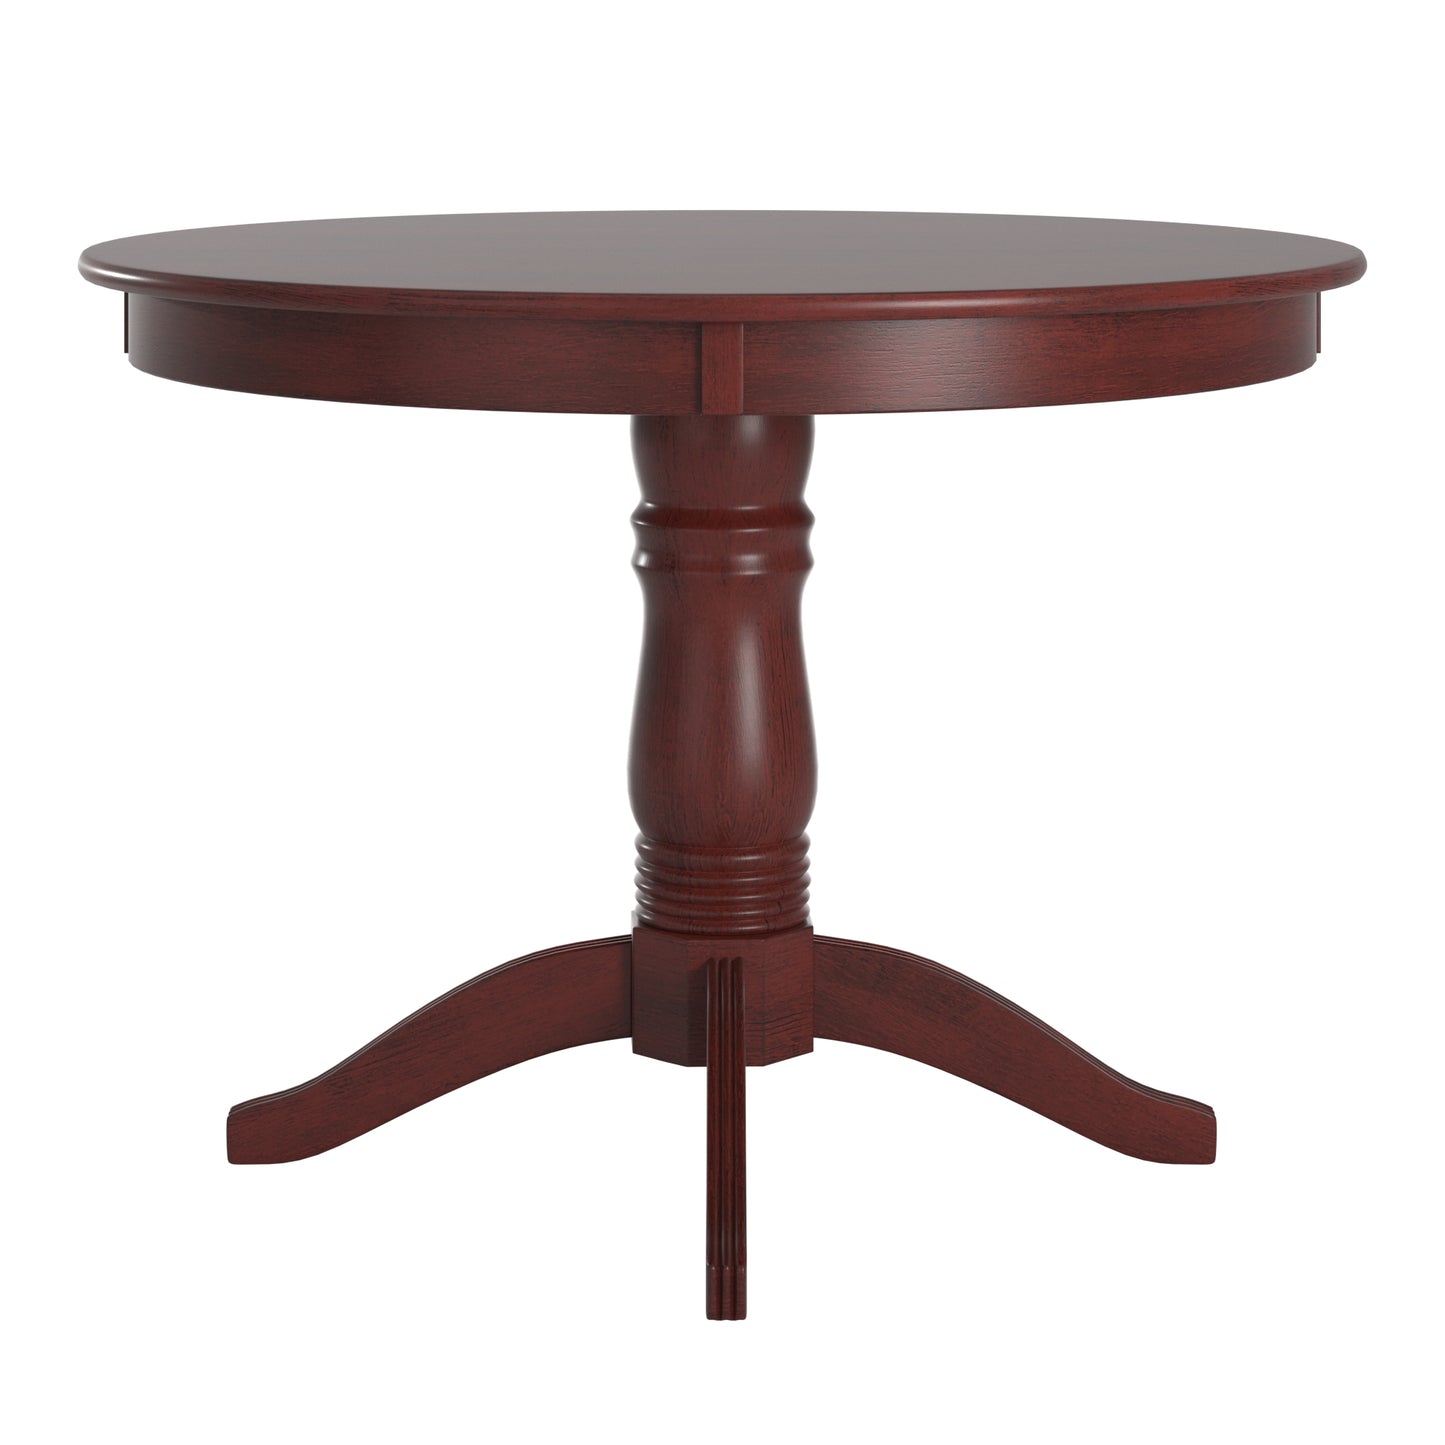 Round Pedestal Base Dining Table - Antique Berry Finish